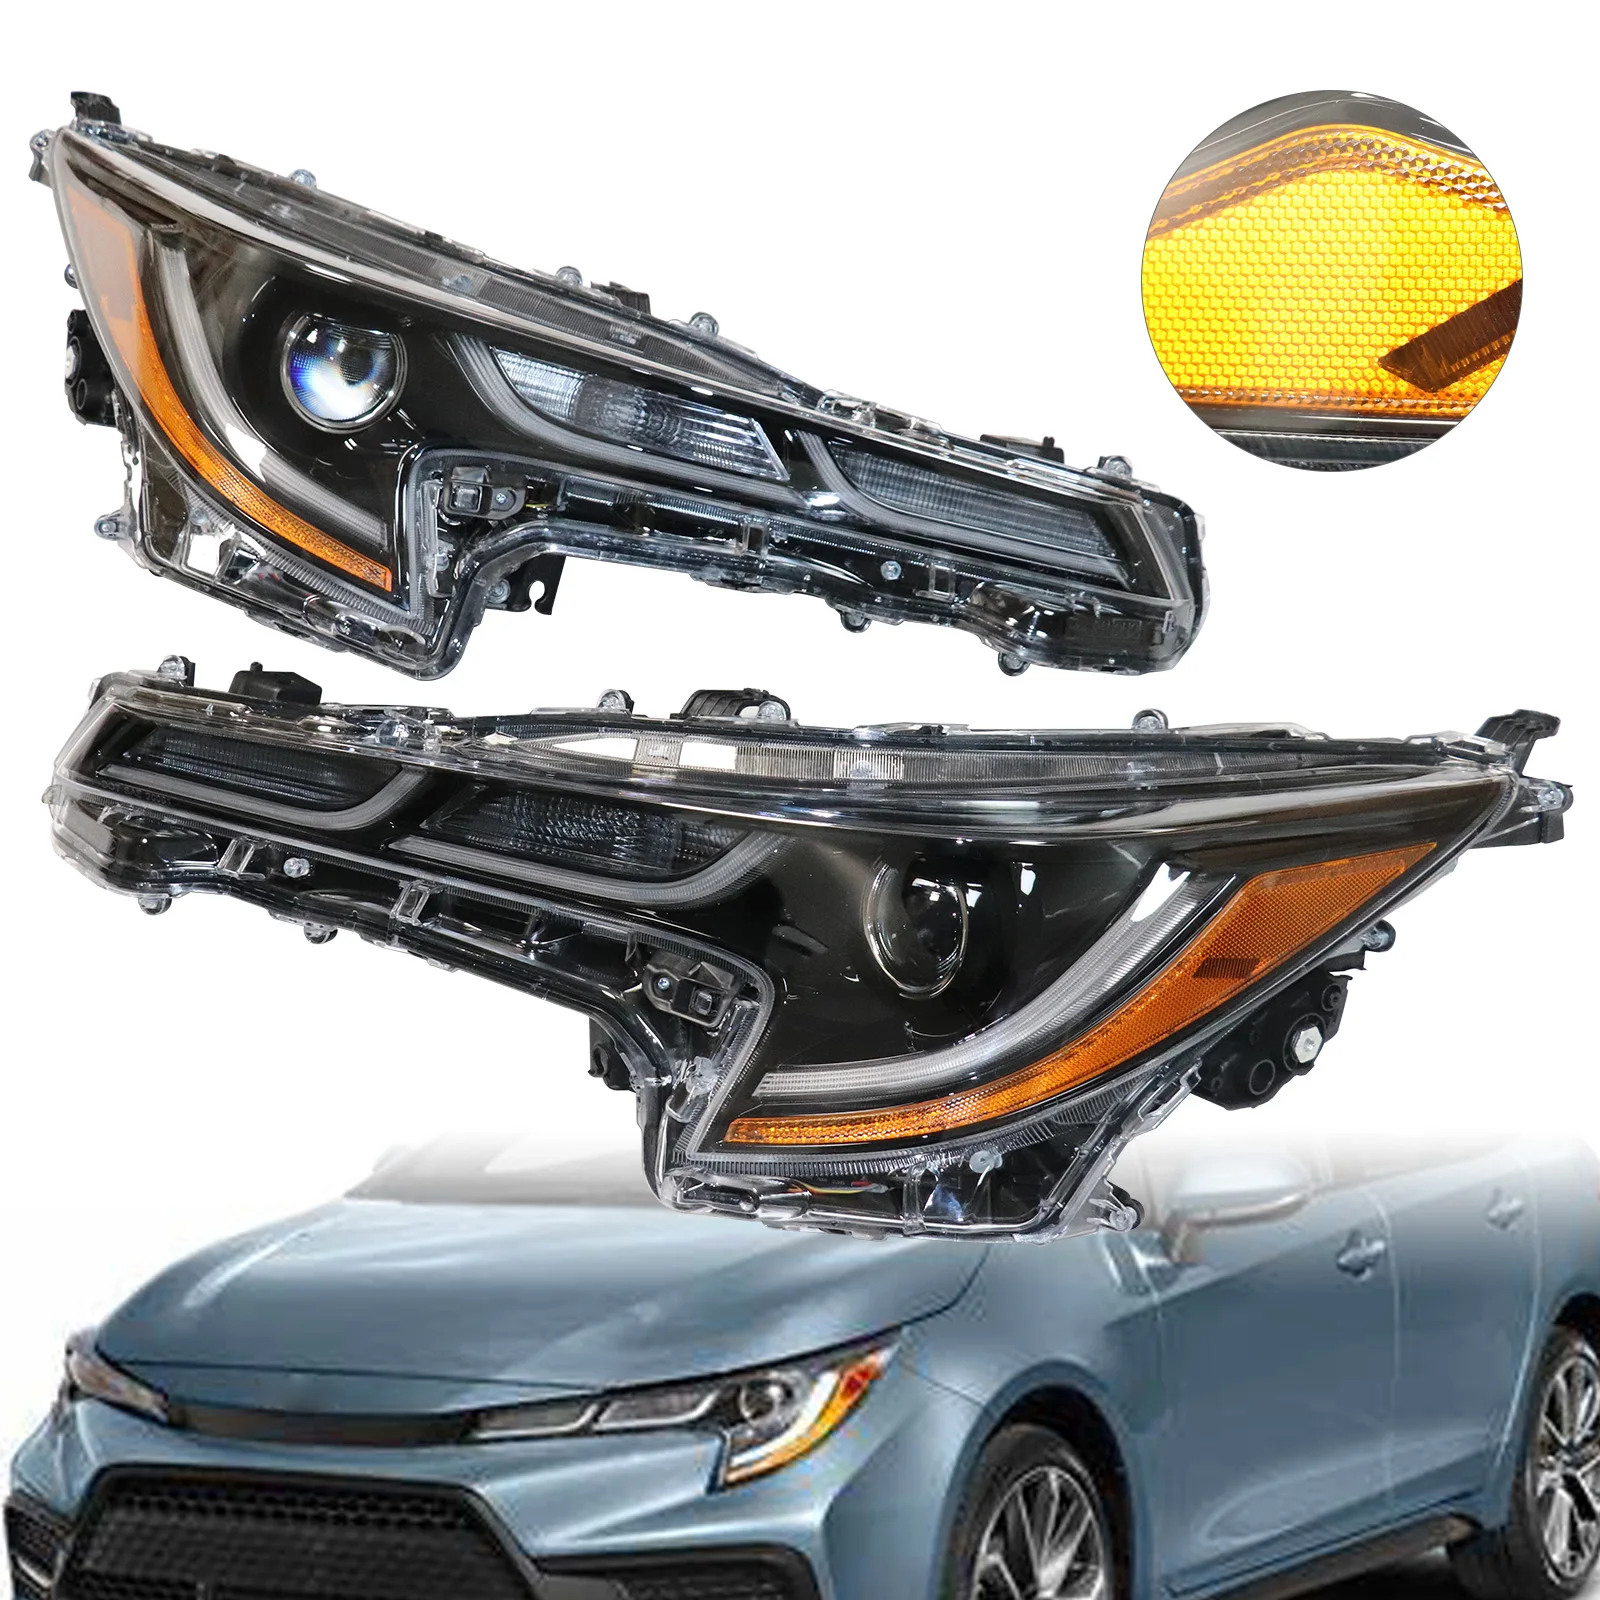 

Left / Right Headlight Headlamp LED DRL For 2020-2021 Toyota Corolla SE XLE XSE LED Headlight Assembly Car Accessories